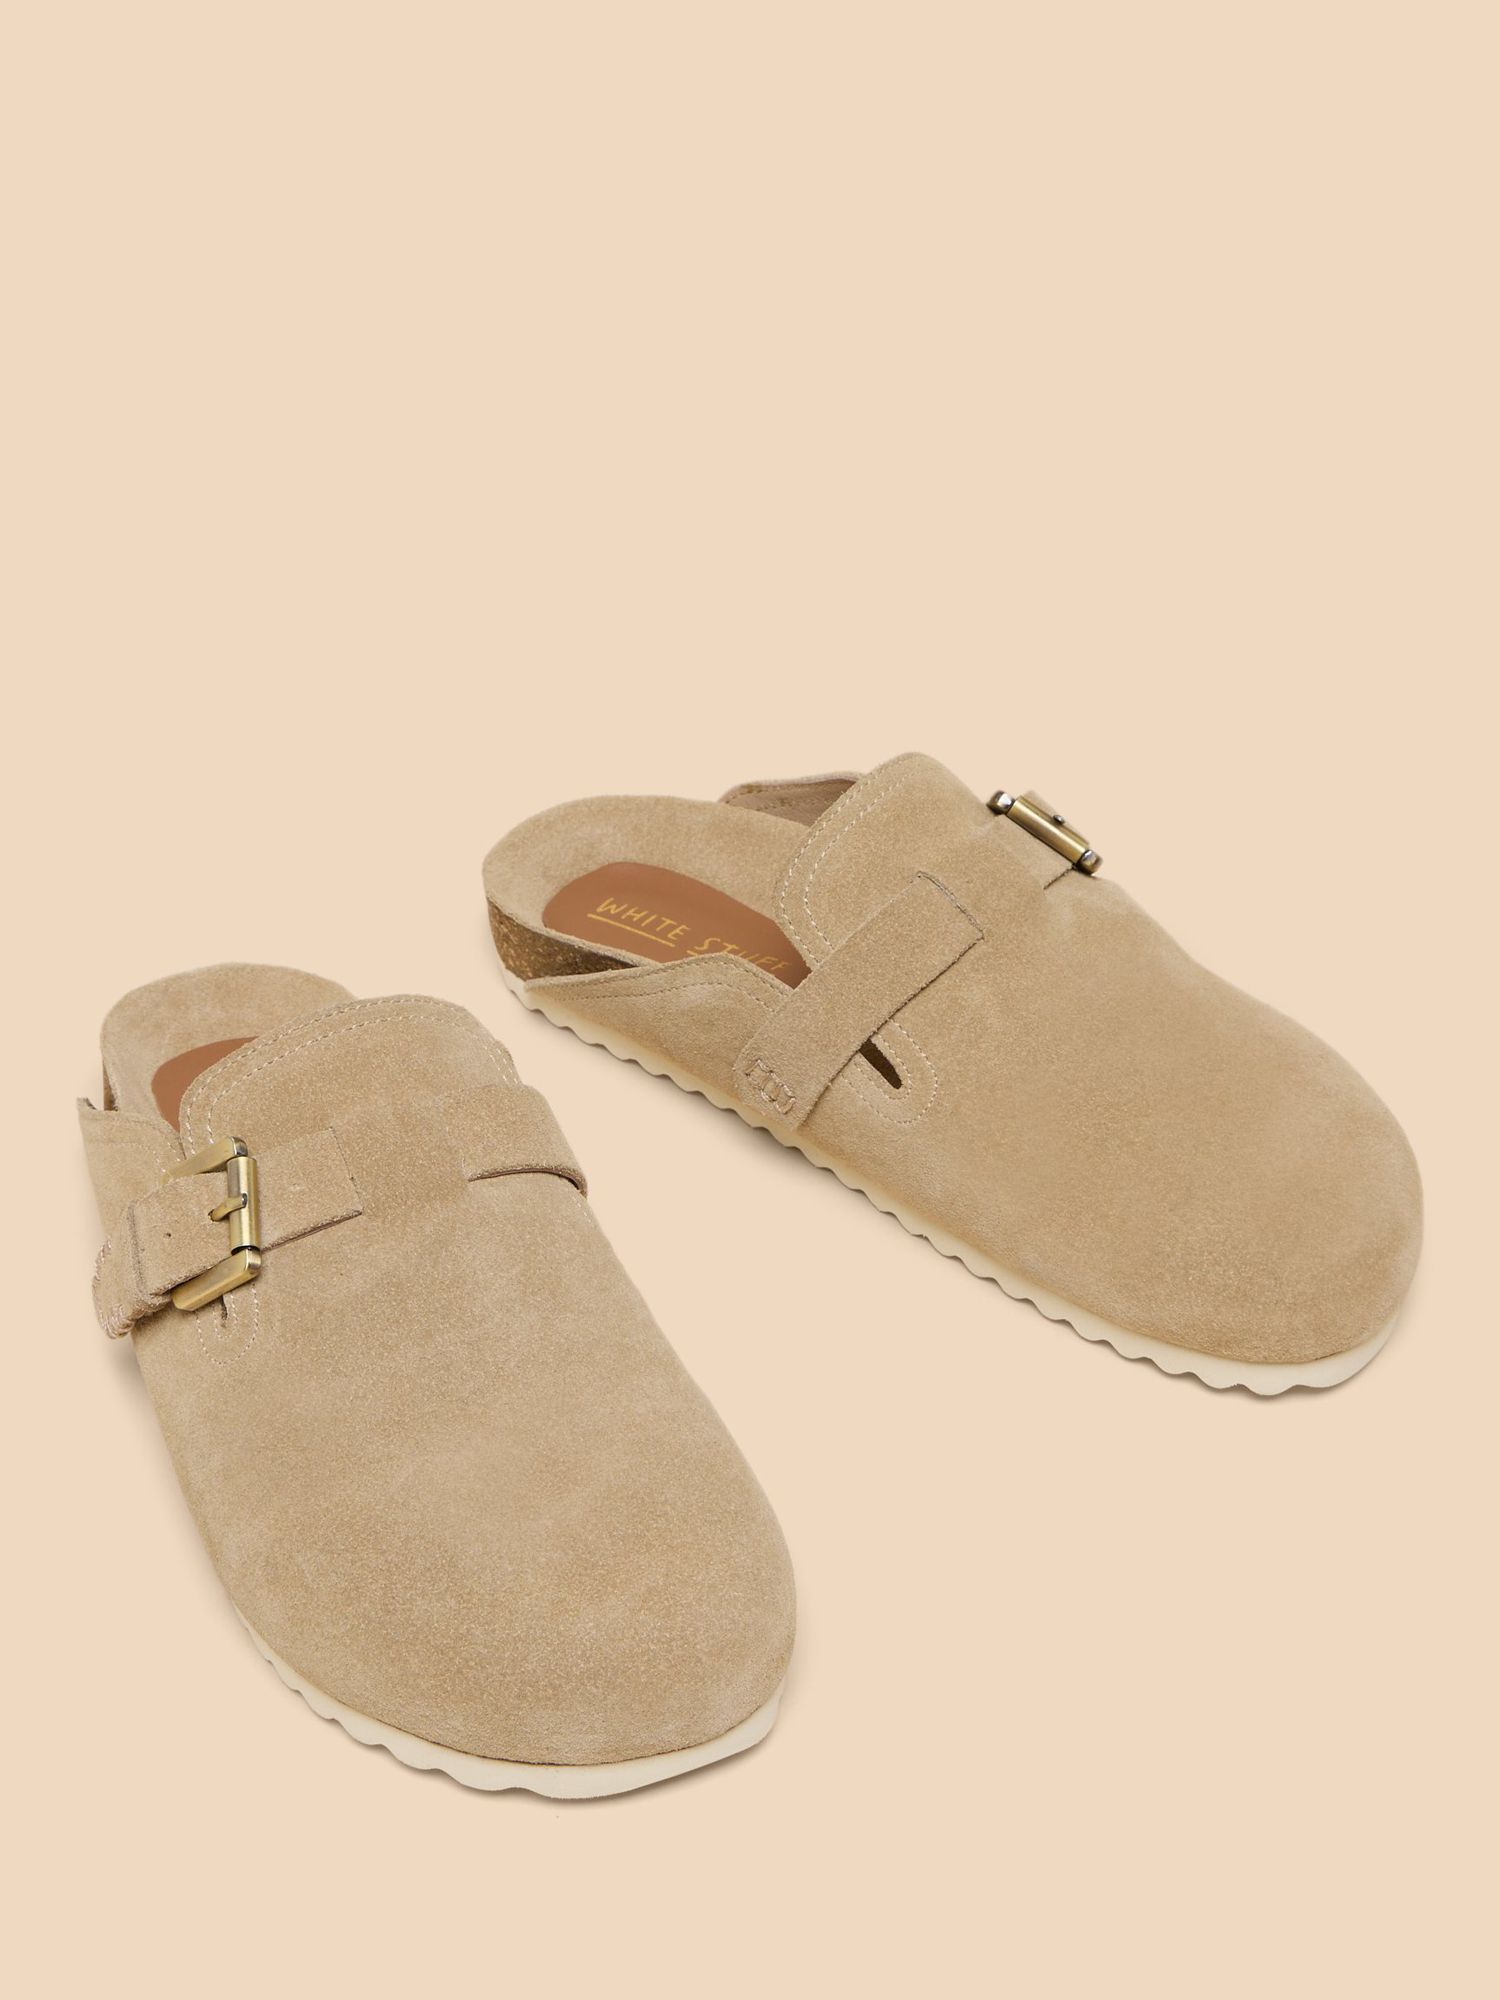 White Stuff Suede Slip On Mules, Natural, 3